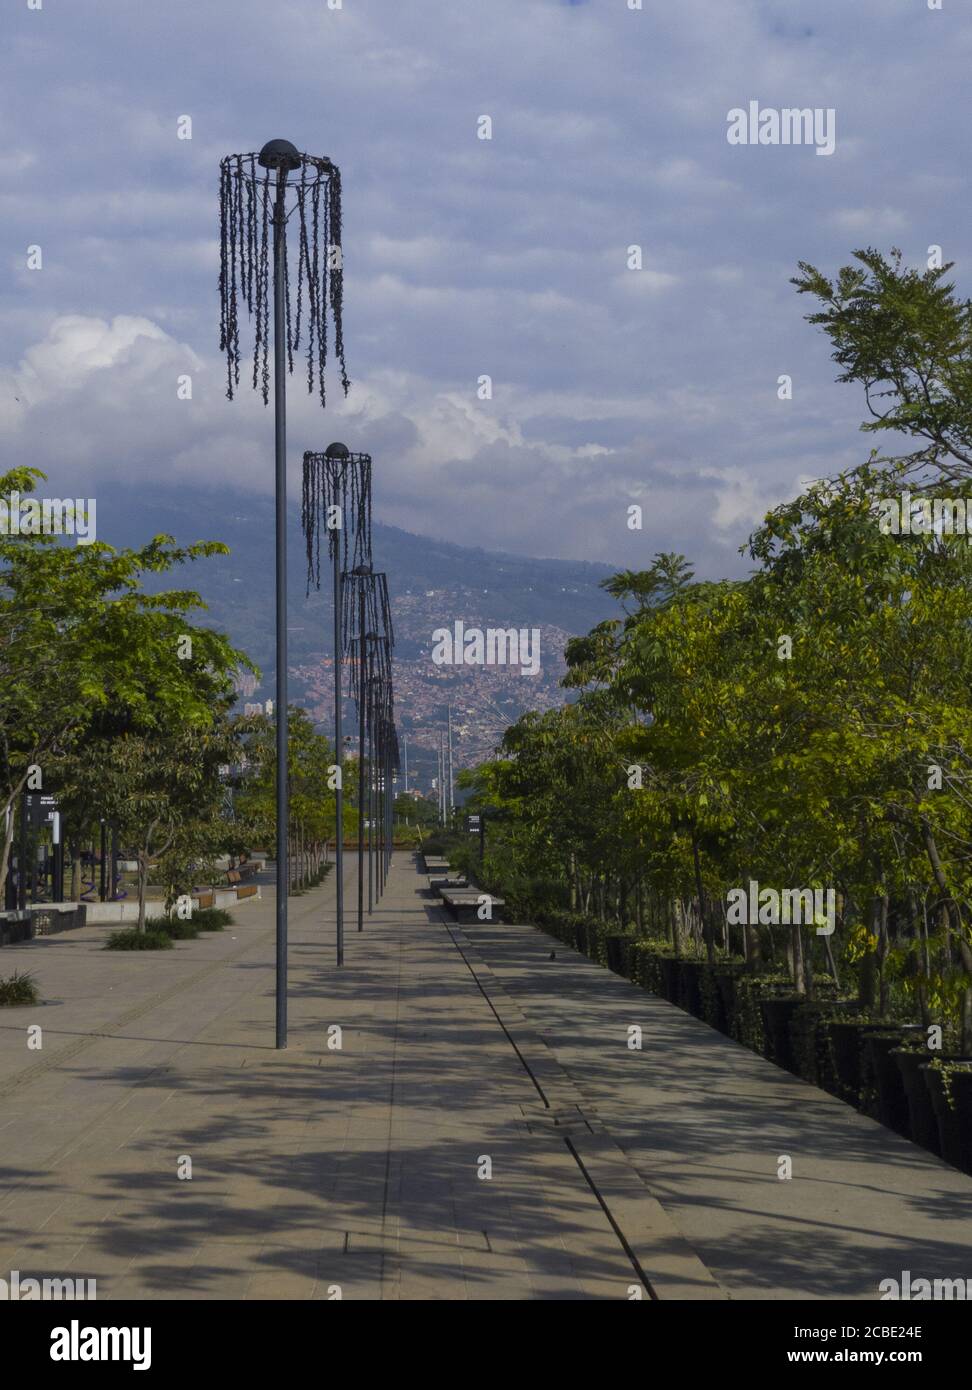 MEDELLIN, COLOMBIA - Mar 28, 2020: Park to do some exercise in the city of medellin with no people during quarantine. Stock Photo